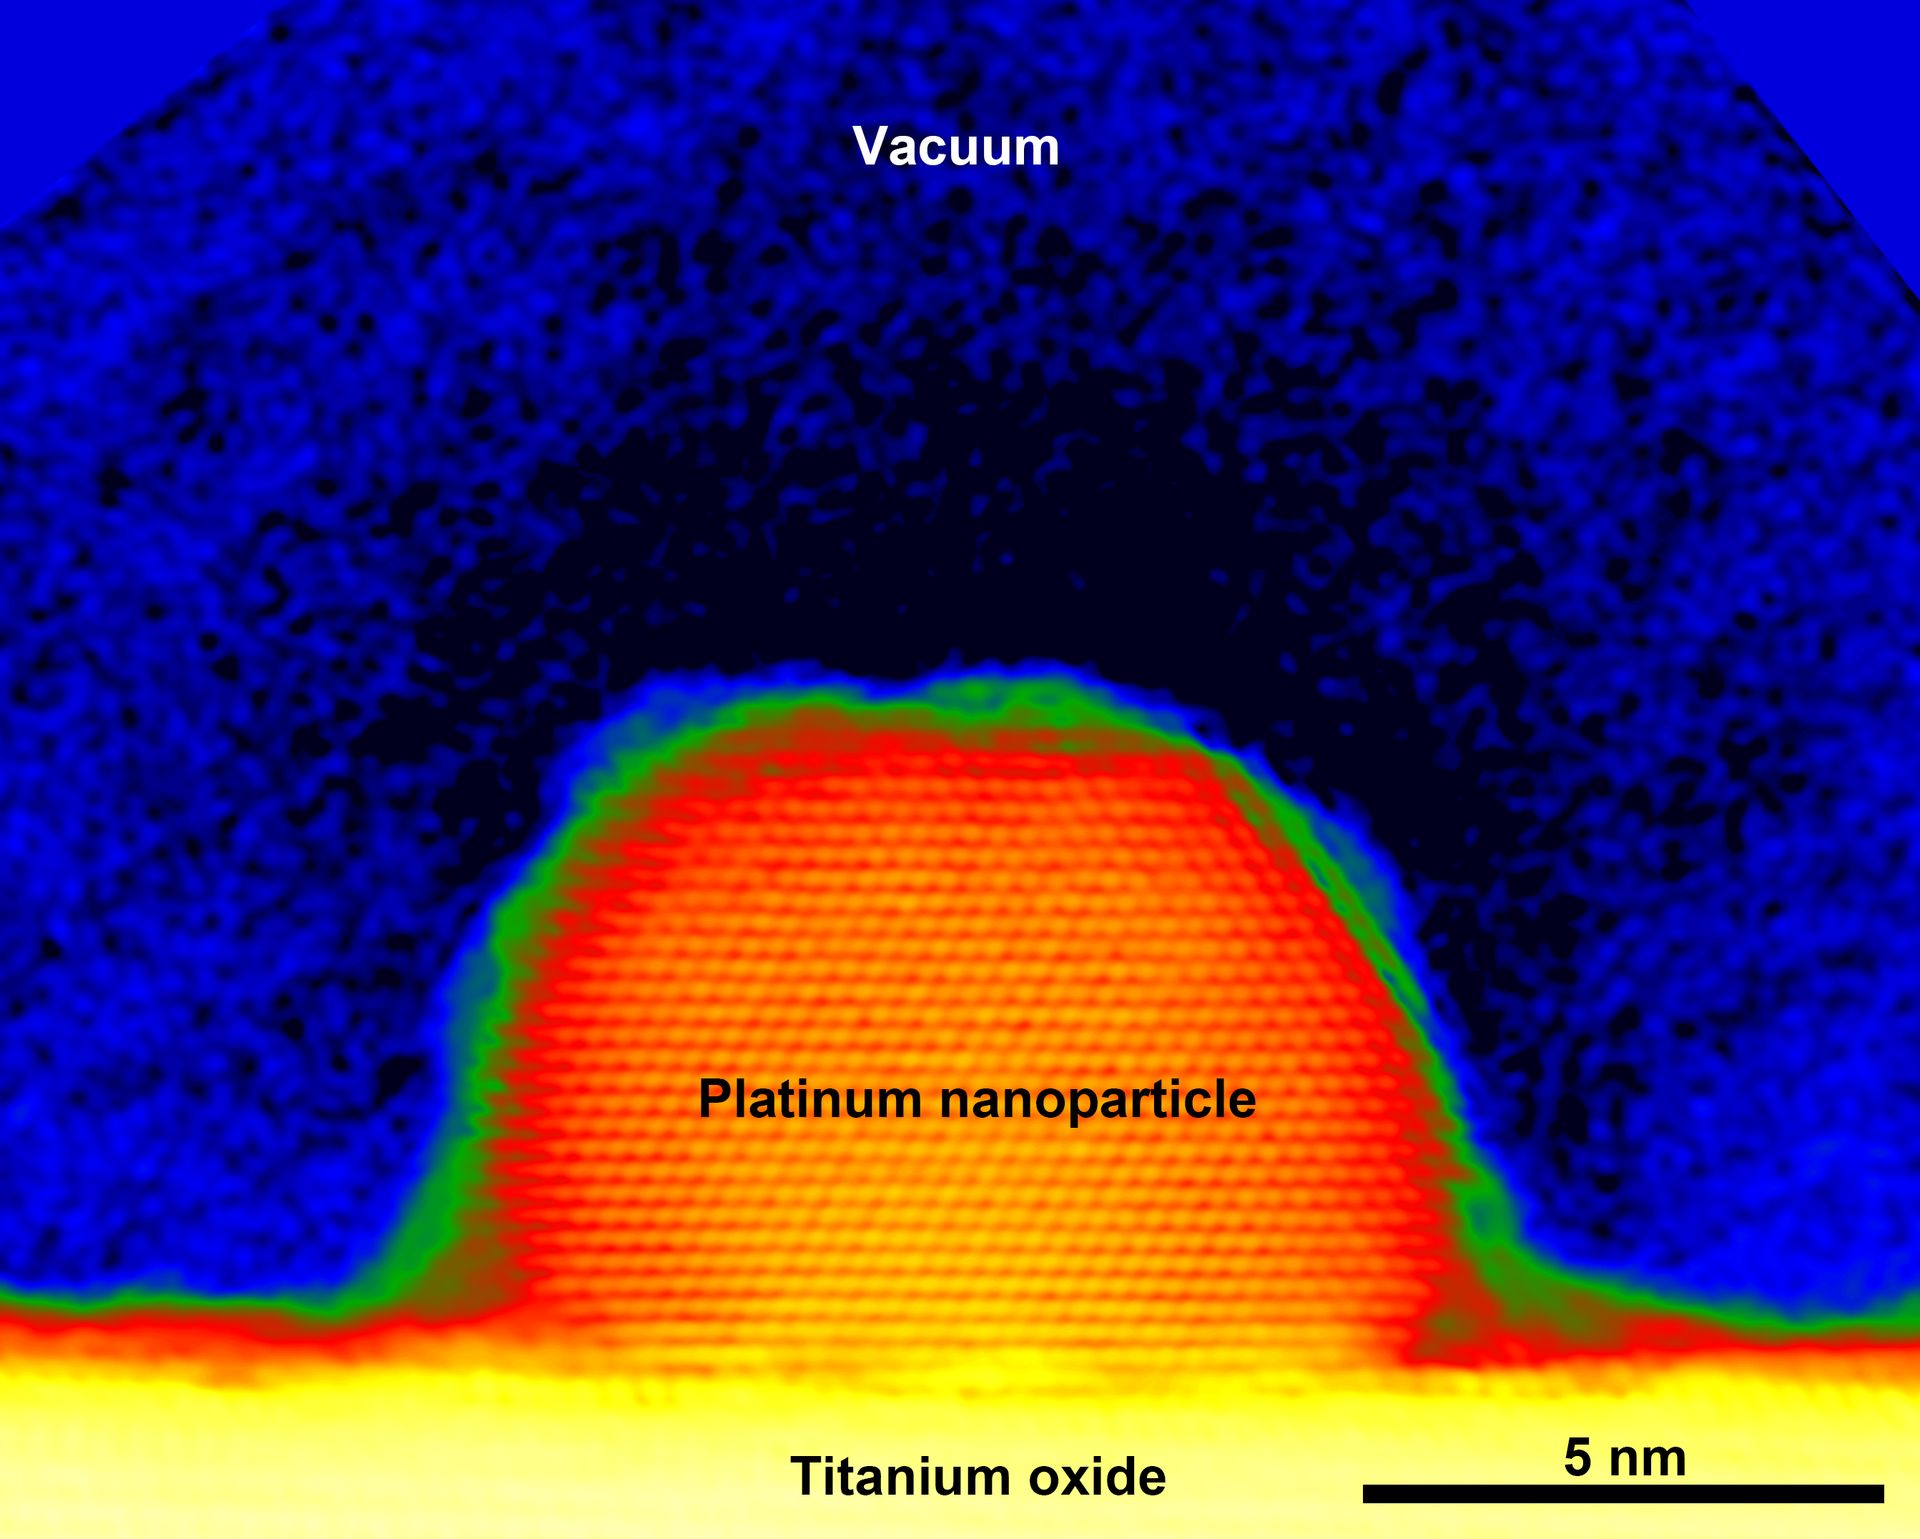 A single platinum nanoparticle observed by electron holography